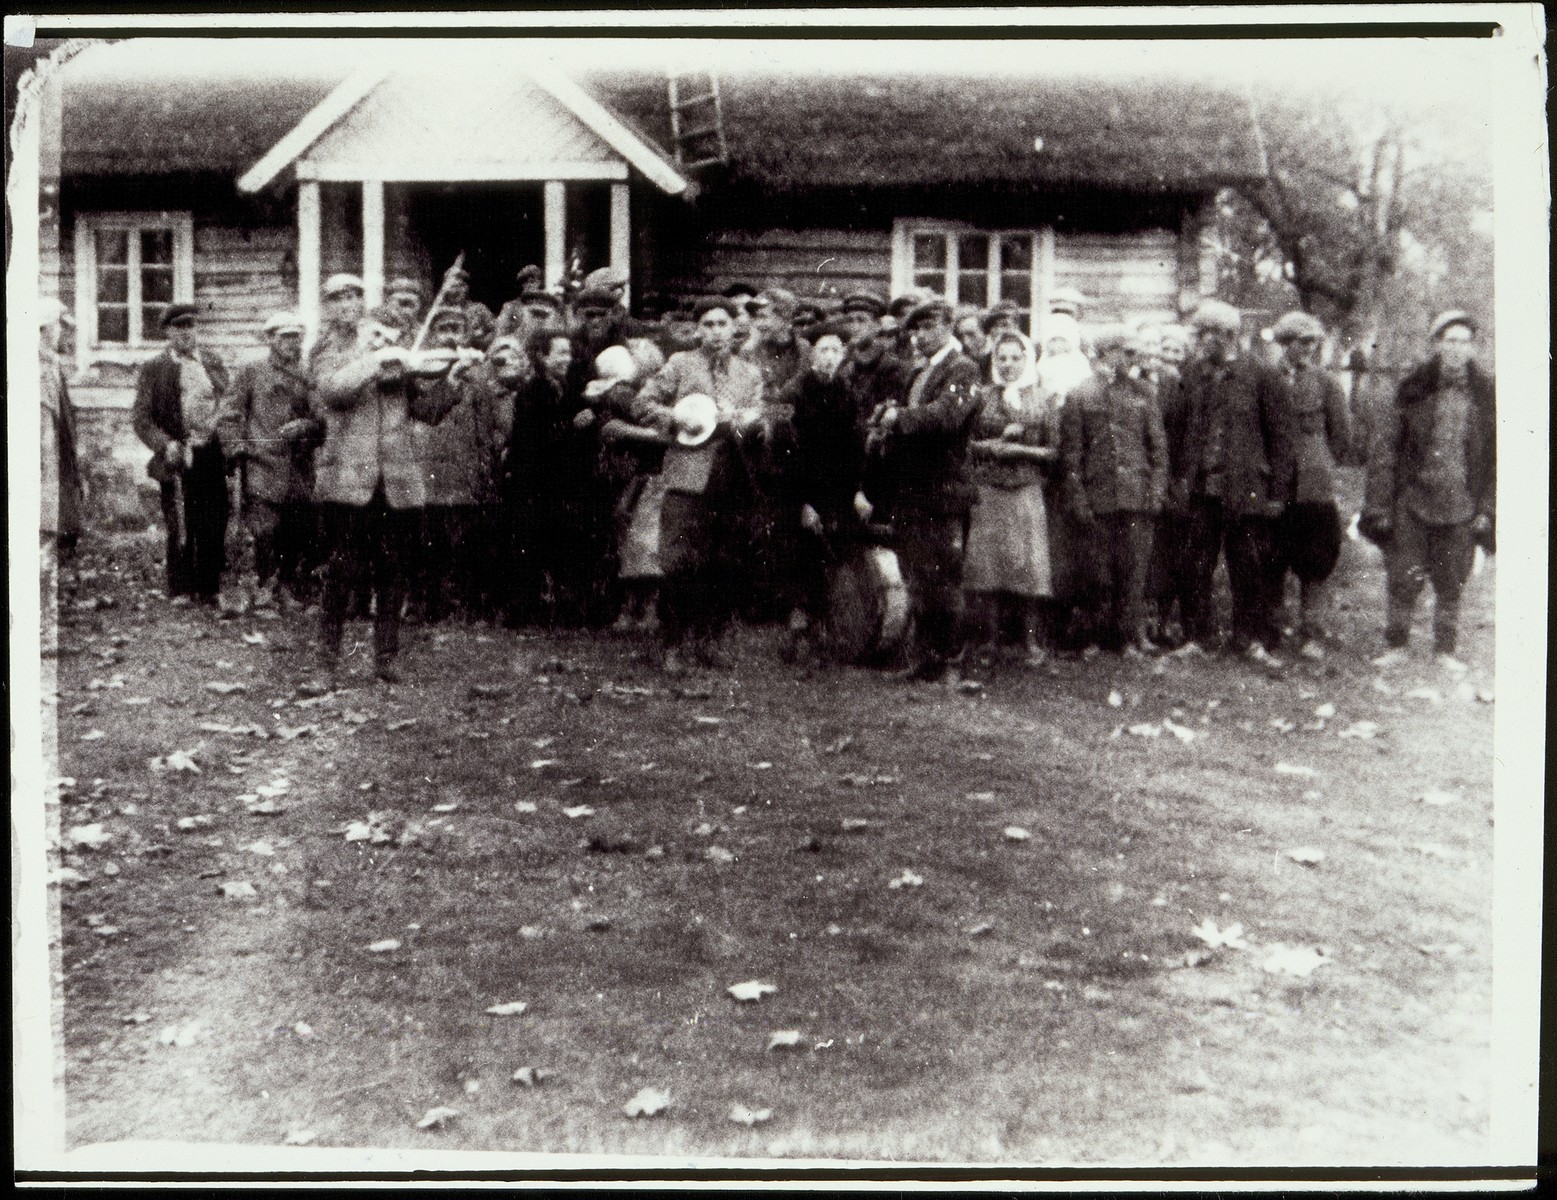 Peasants, some with musical instruments, celebrate the redistribution of land in the region.  

Luba Ginunski, one of the shtetl's leading Communists, distributed land to five hundred poor Polish peasants in the autumn of 1940.  Luba, is pictured dressed in black, speaking to a woman with a white kerchief.  She survived the war in the Soviet interior and afterwards immigrated to Israel.